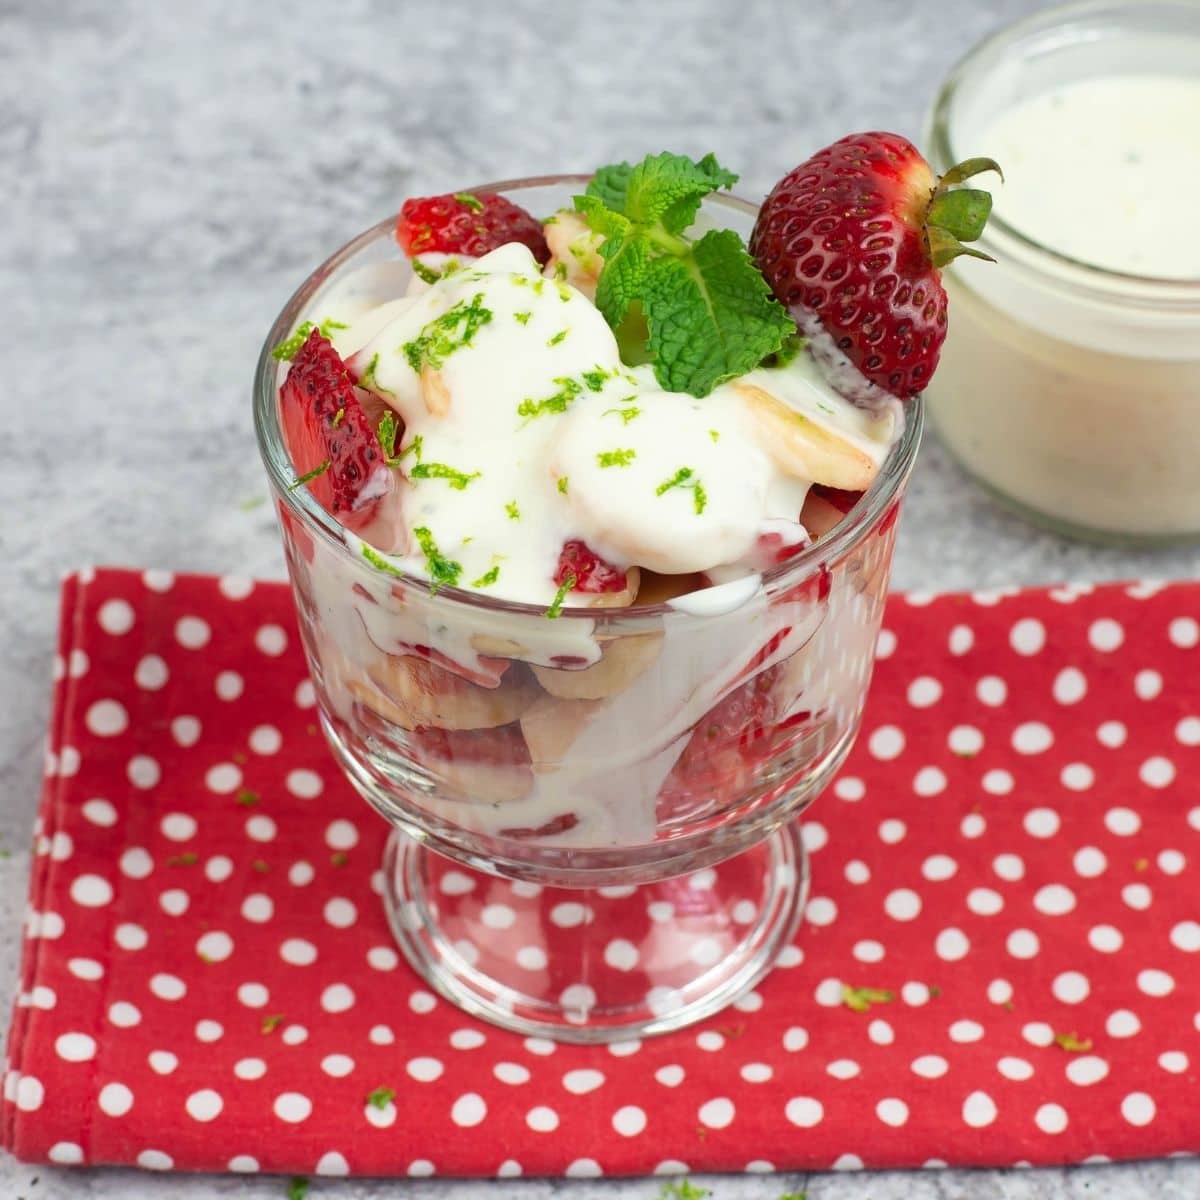 Strawberry and banana fruit salad topped with dreamy yogurt dressing.